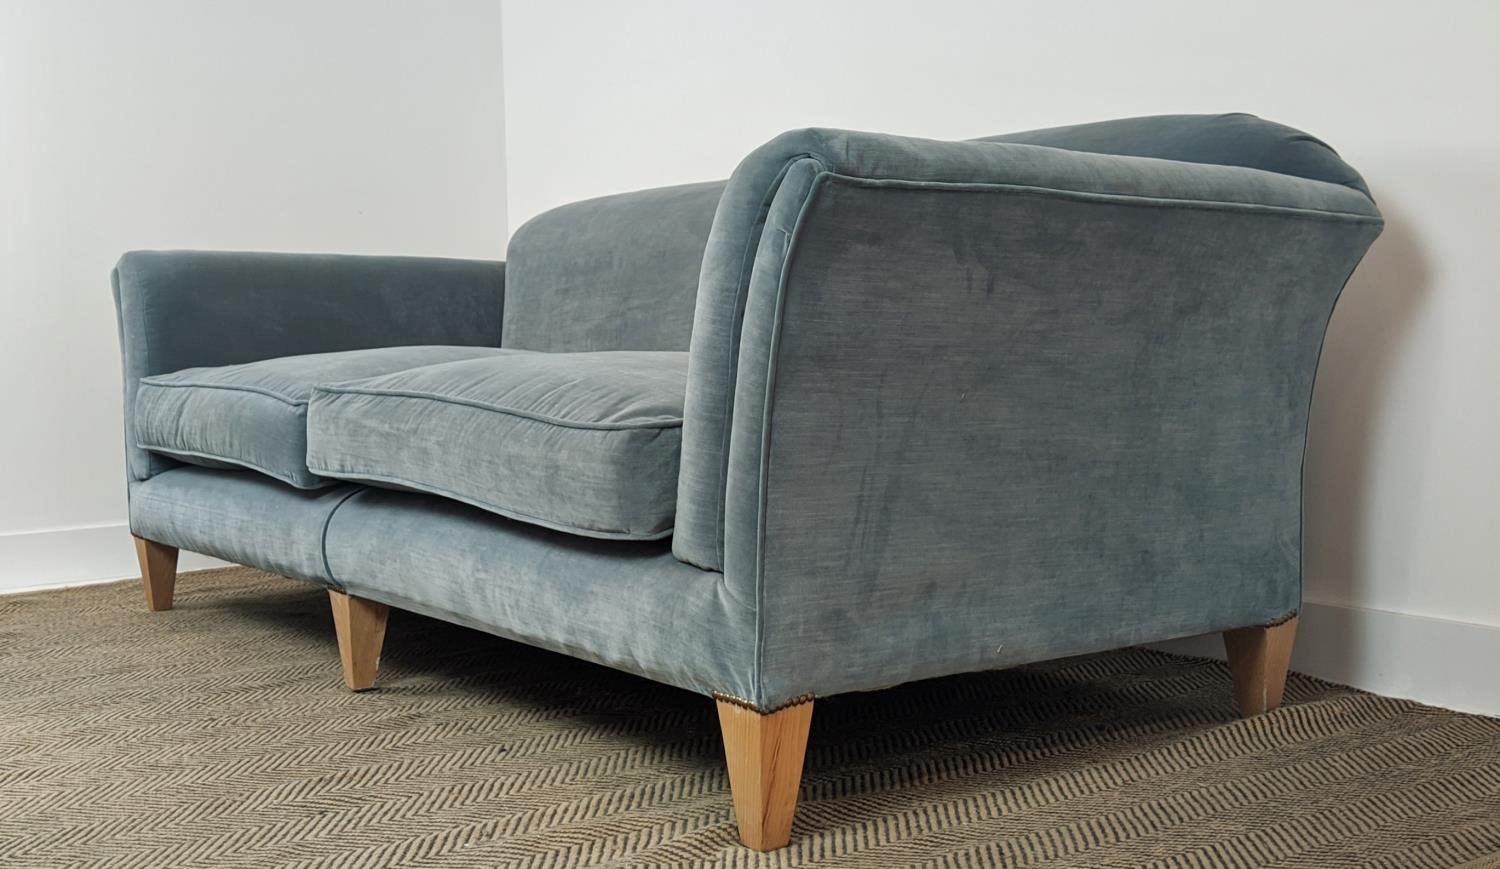 SOFA, velvet upholstered with seat cushions and beechwood legs, 83cm H x 224cm W x 103cm D. - Image 6 of 10